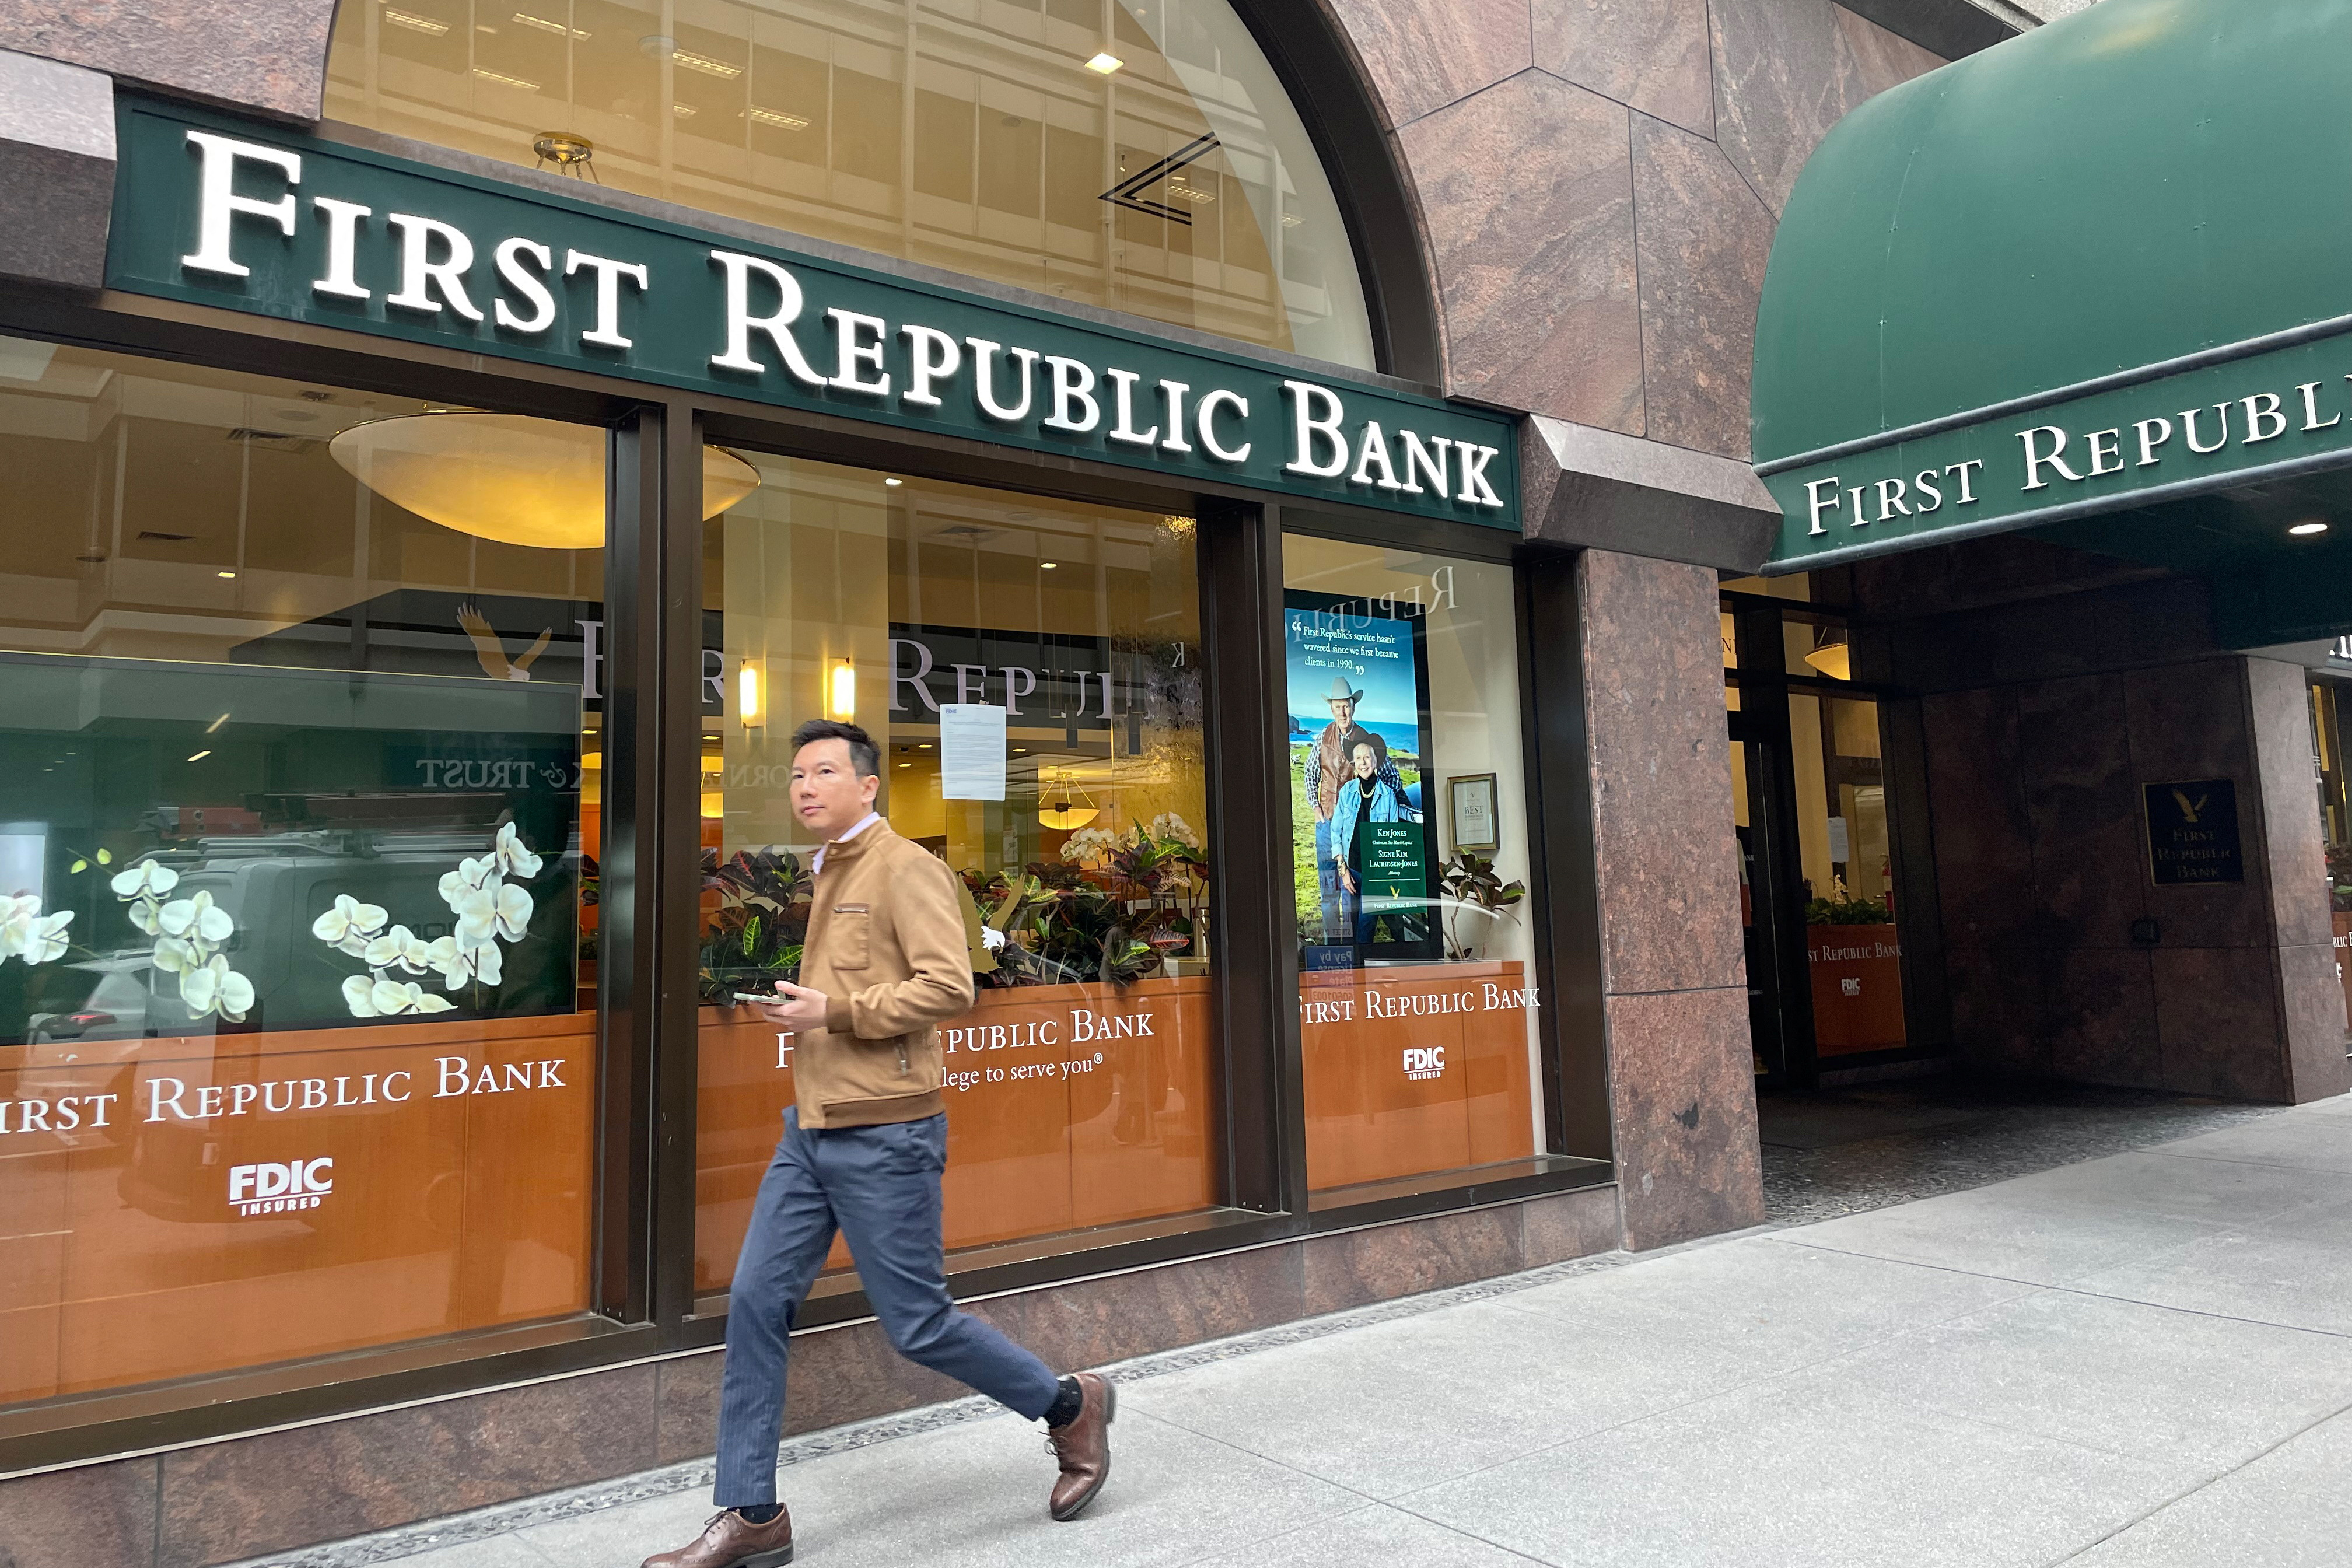 A branch of First Republic Bank is seen after Jamie Dimon's JPMorgan Chase & Co emerged as the winner of a weekend auction